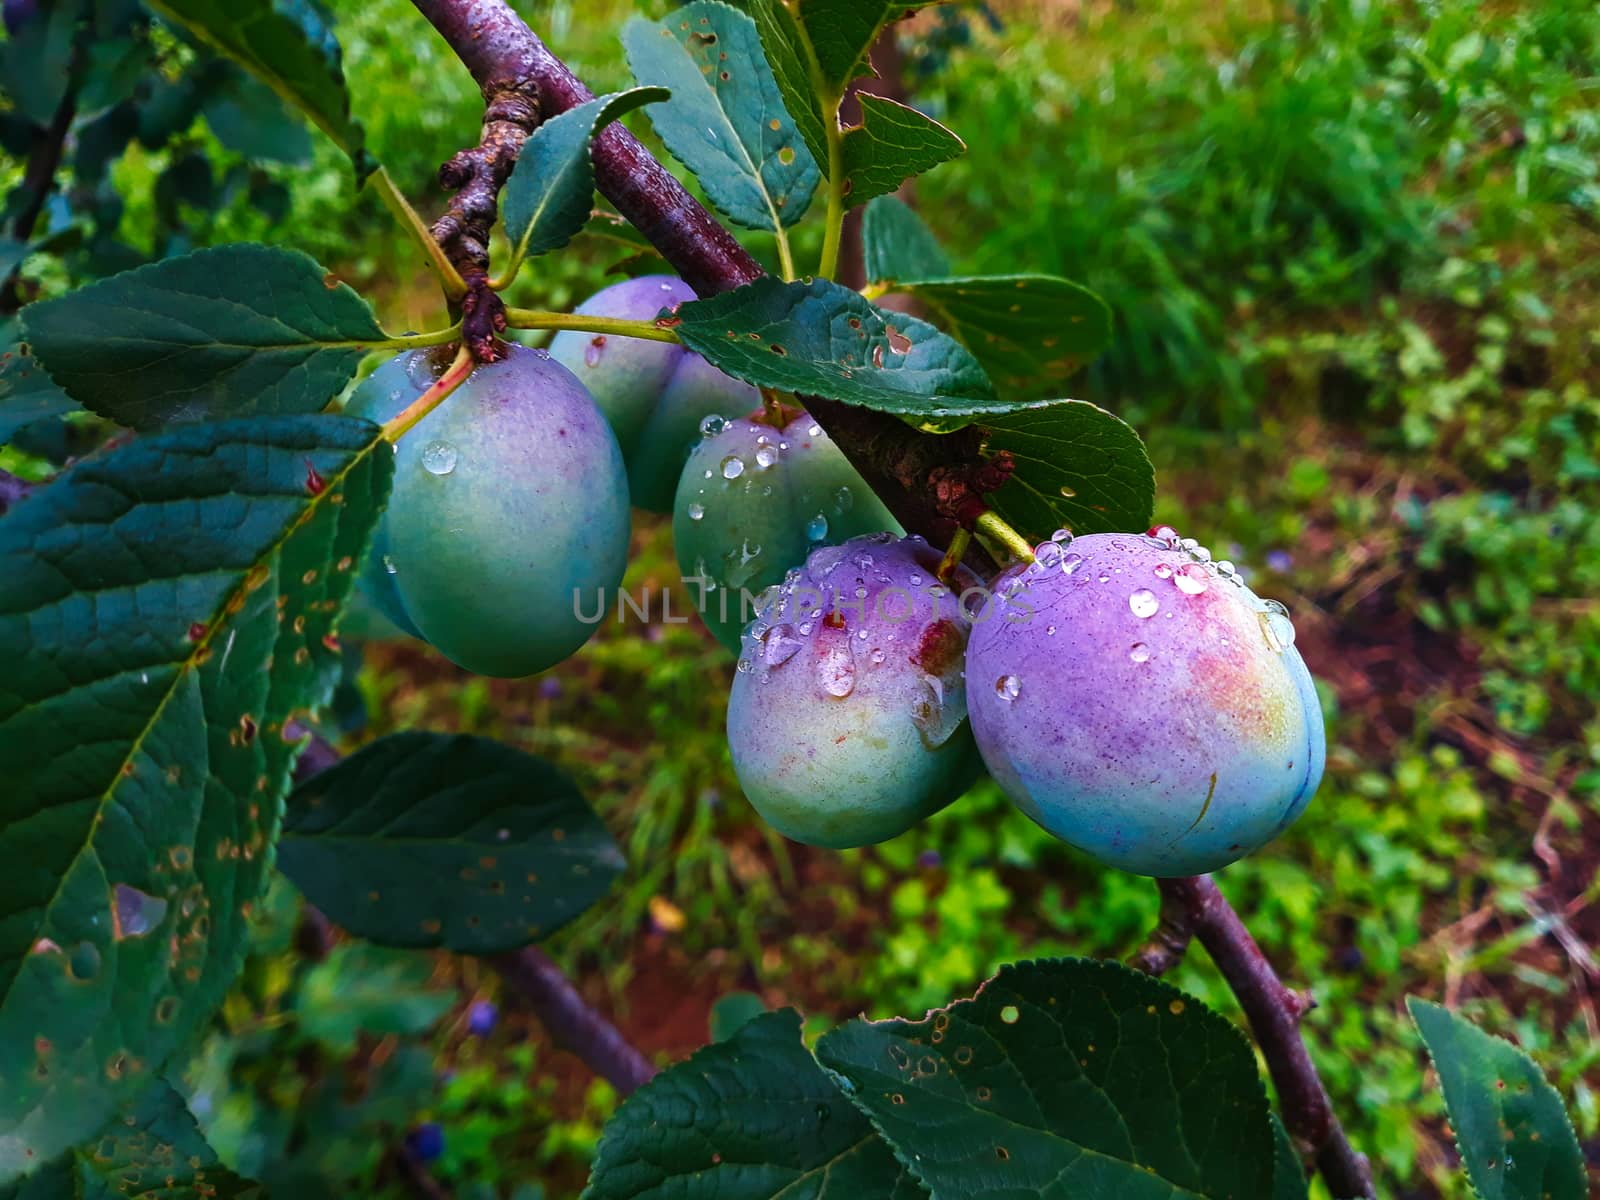 Drops of water after the rain on the green young plums that have begun to ripen. Zavidovici, Bosnia and Herzegovina.